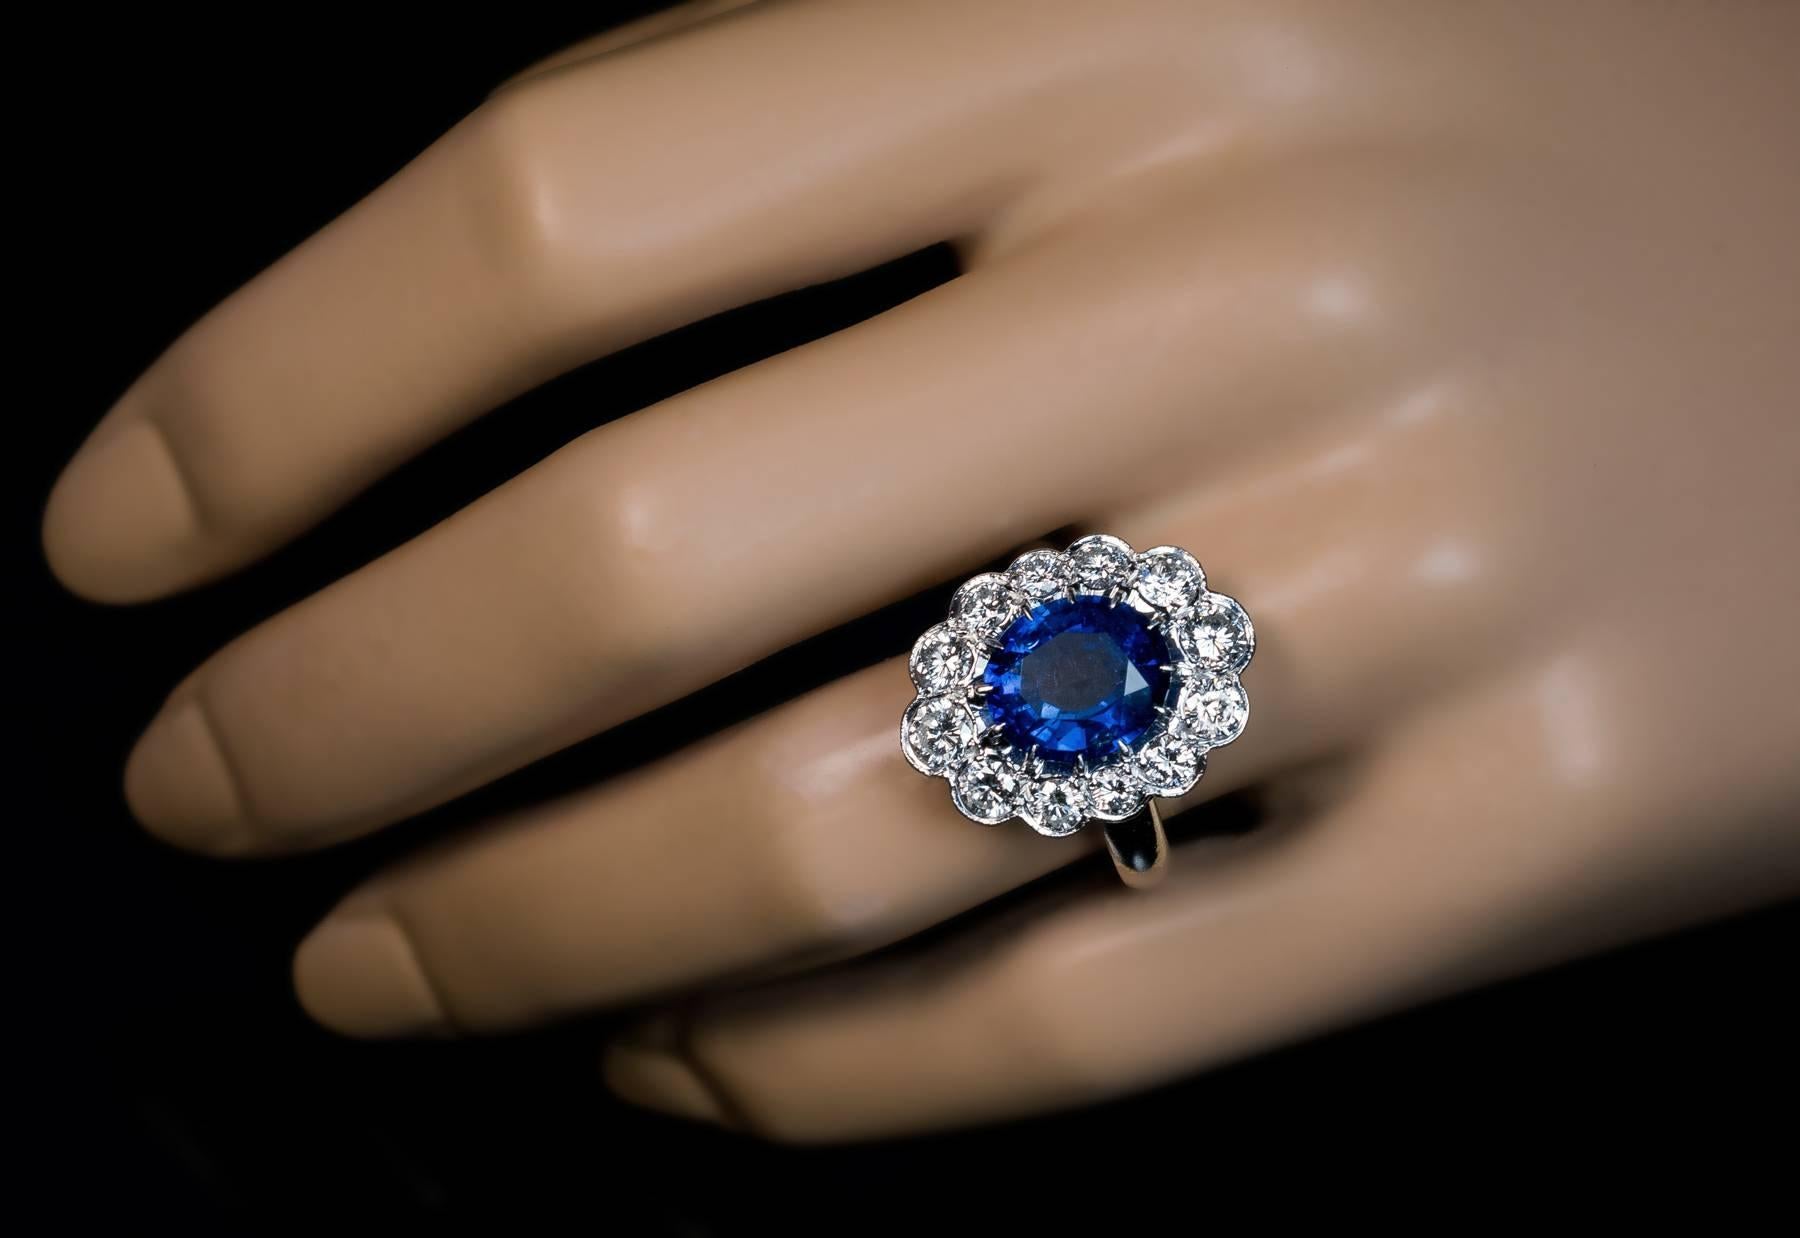 An impressive French cluster ring from the 1940s -1950s.

The handcrafted platinum ring features a natural oval blue sapphire (measuring 10.75 x 9.4 x 4.8 mm, approximately 3.88 ct), framed by twelve bright white brilliant diamonds.
Estimated